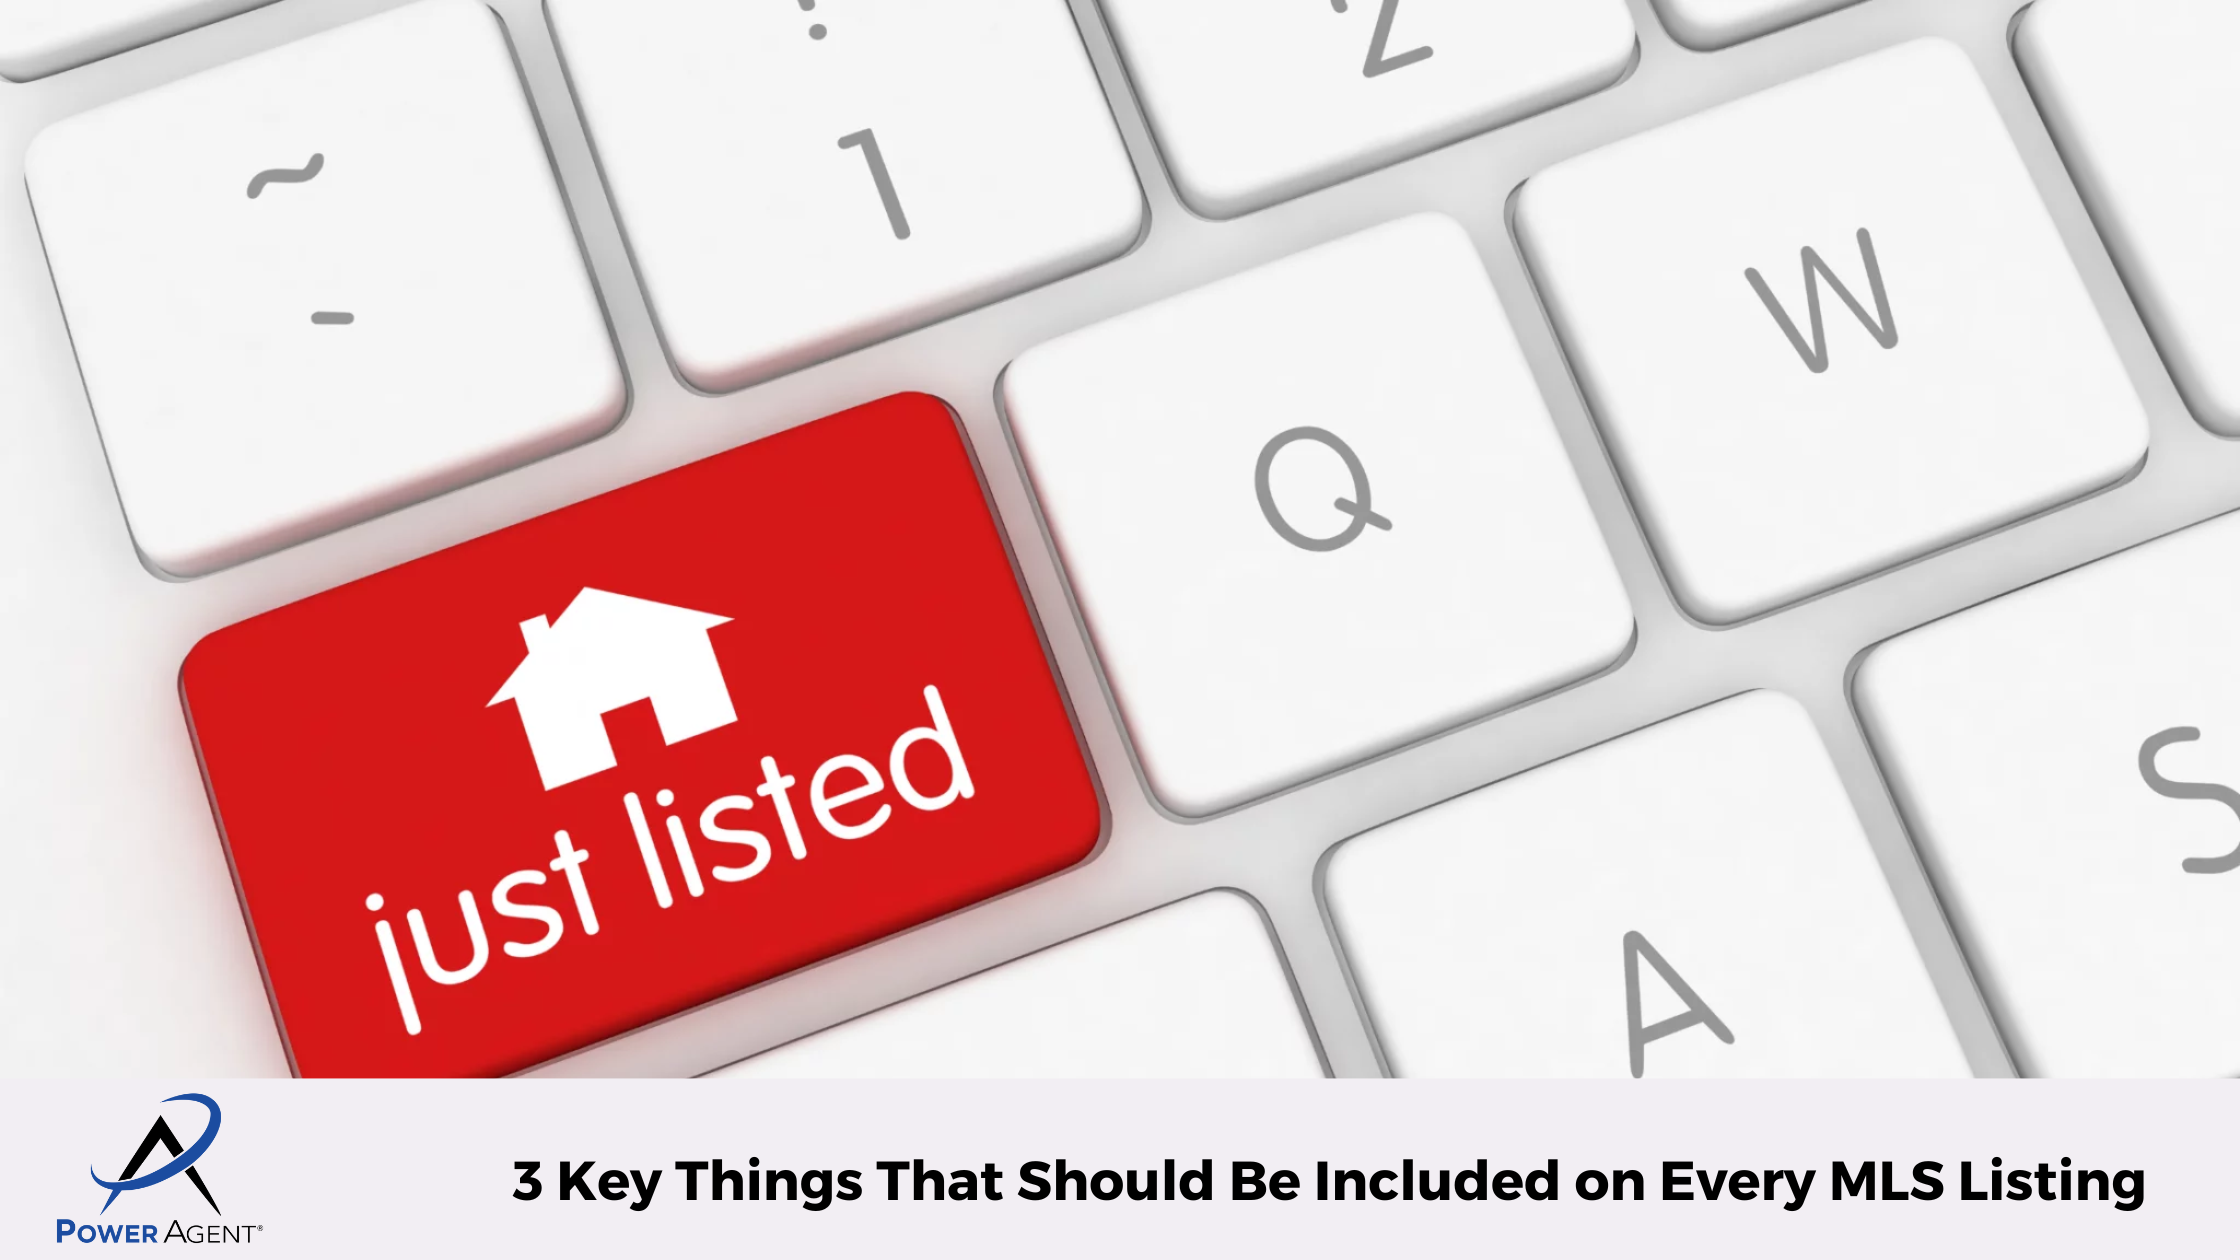 Getting your listing posted on the MLS seems like it’s easy enough, but getting your listing to stand out to buyers is easier when you include these amazing extras.